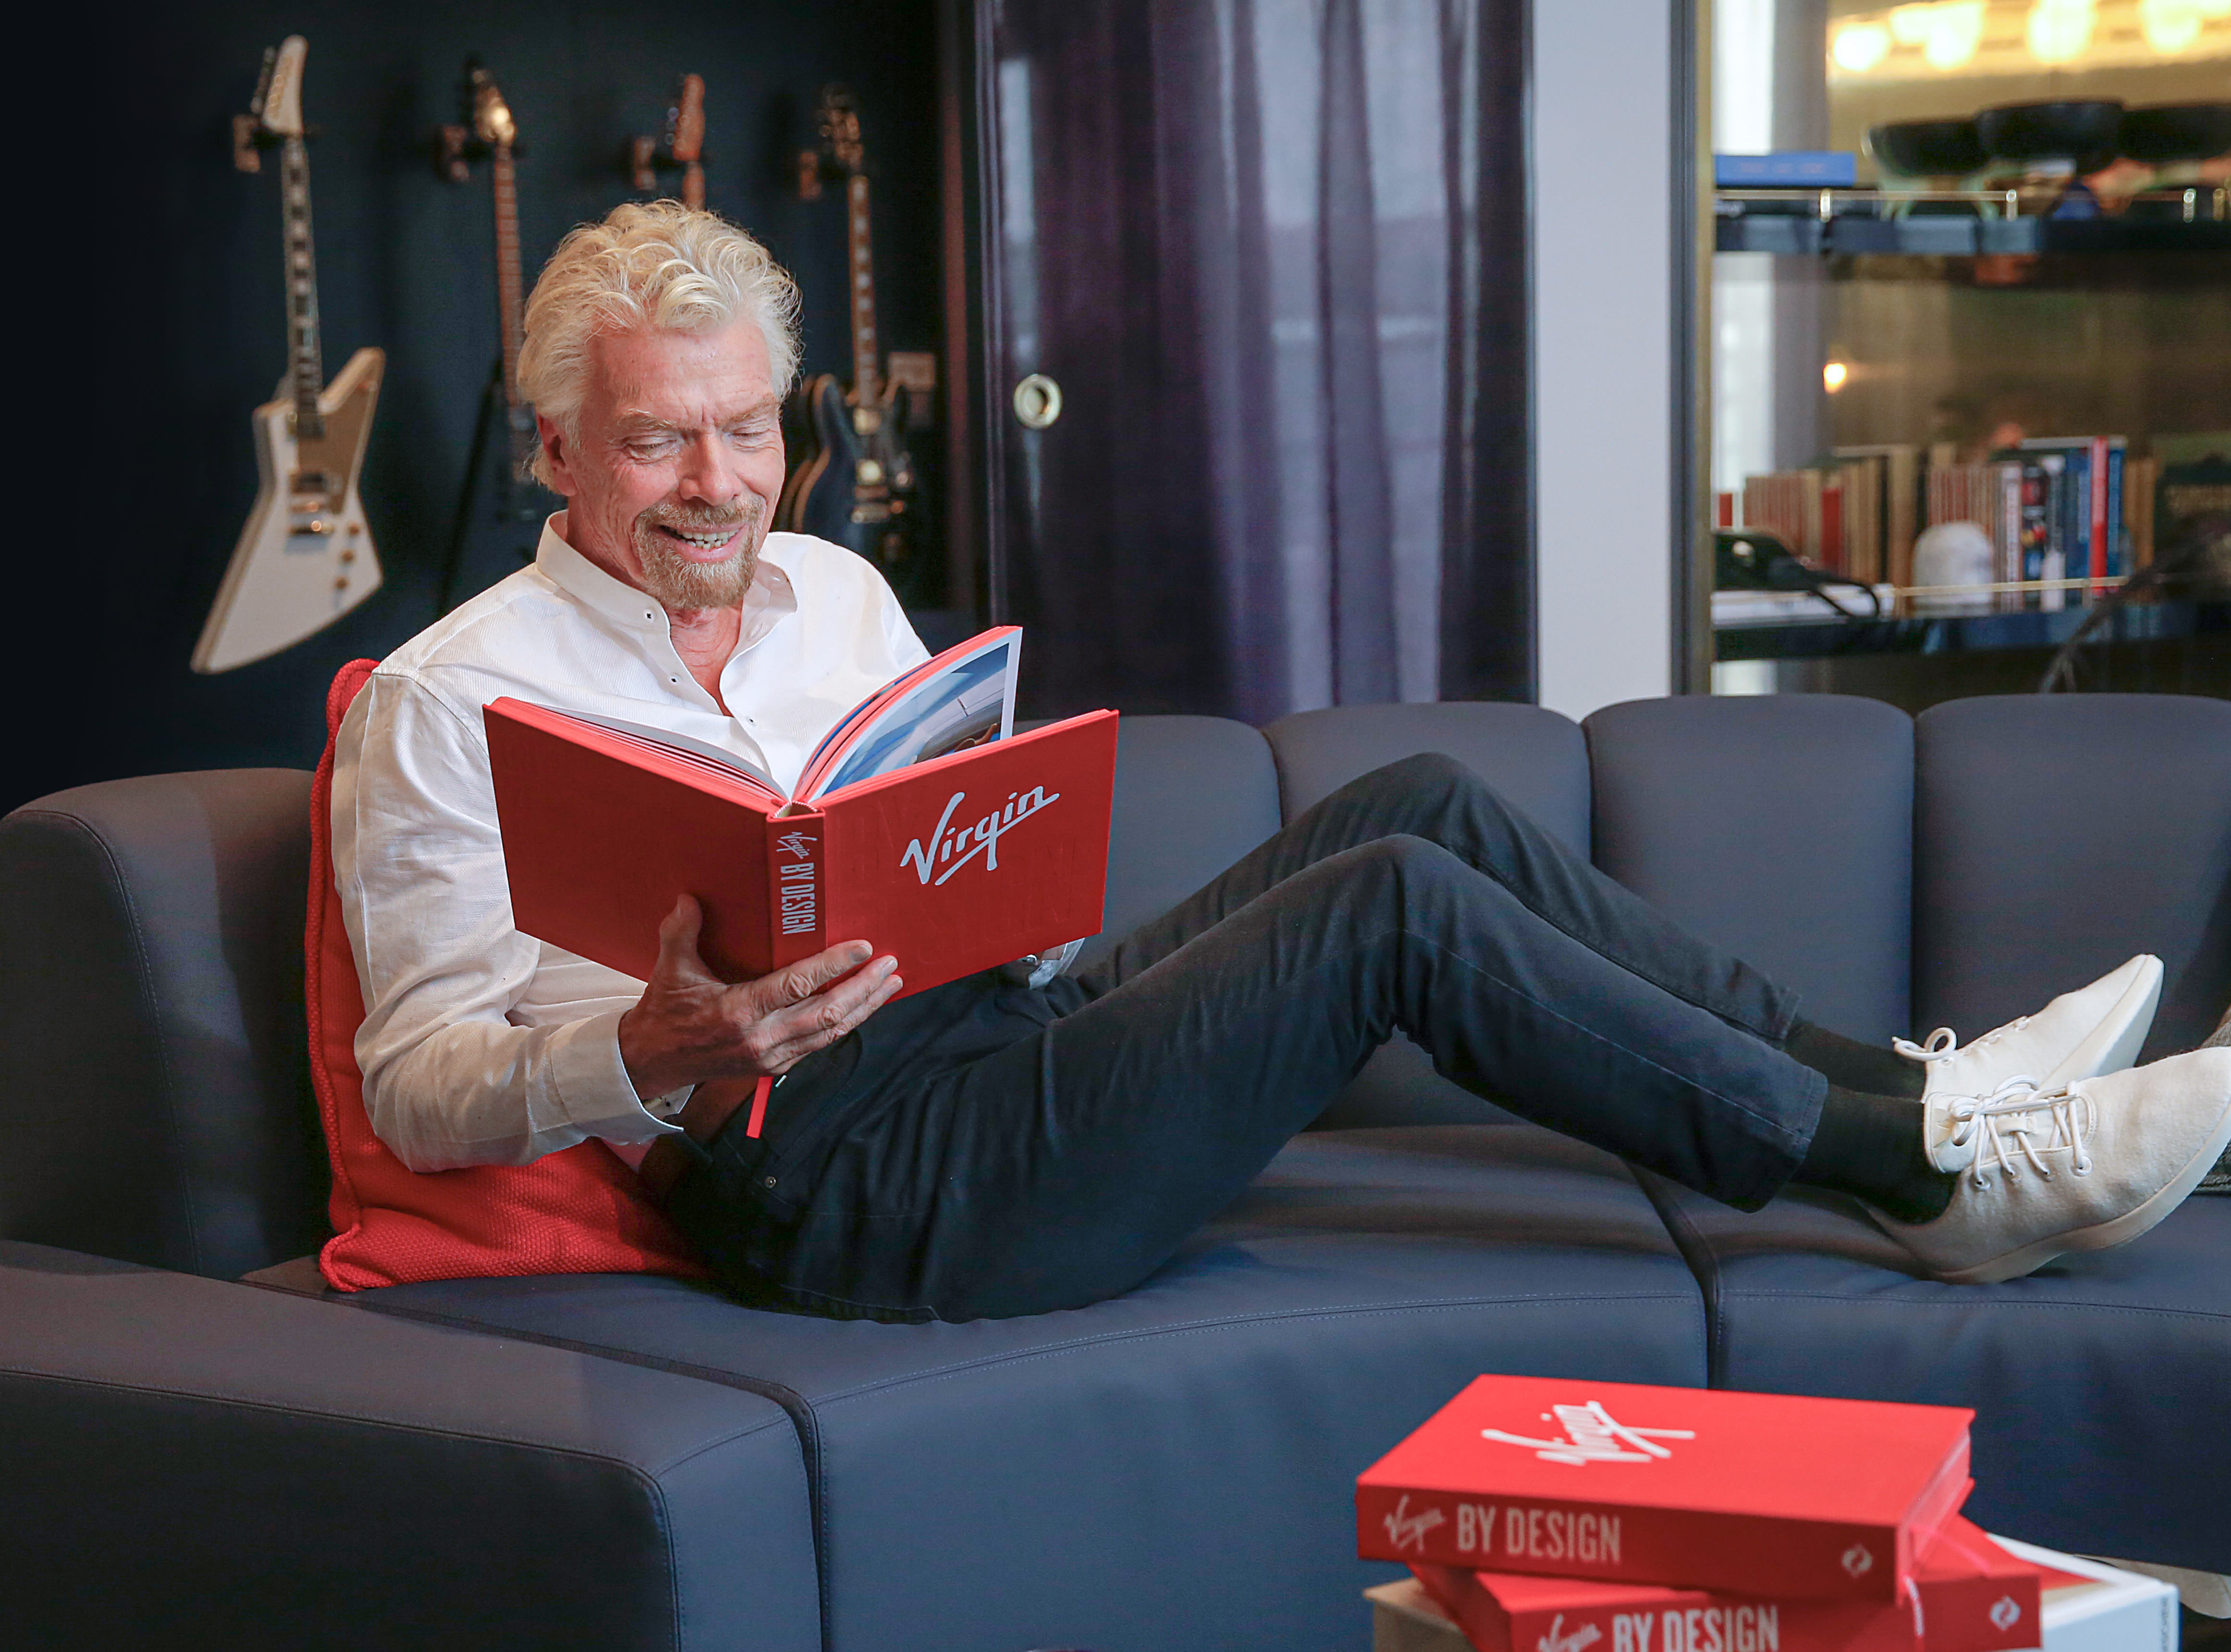 Richard Branson with a copy of Virgin By Design